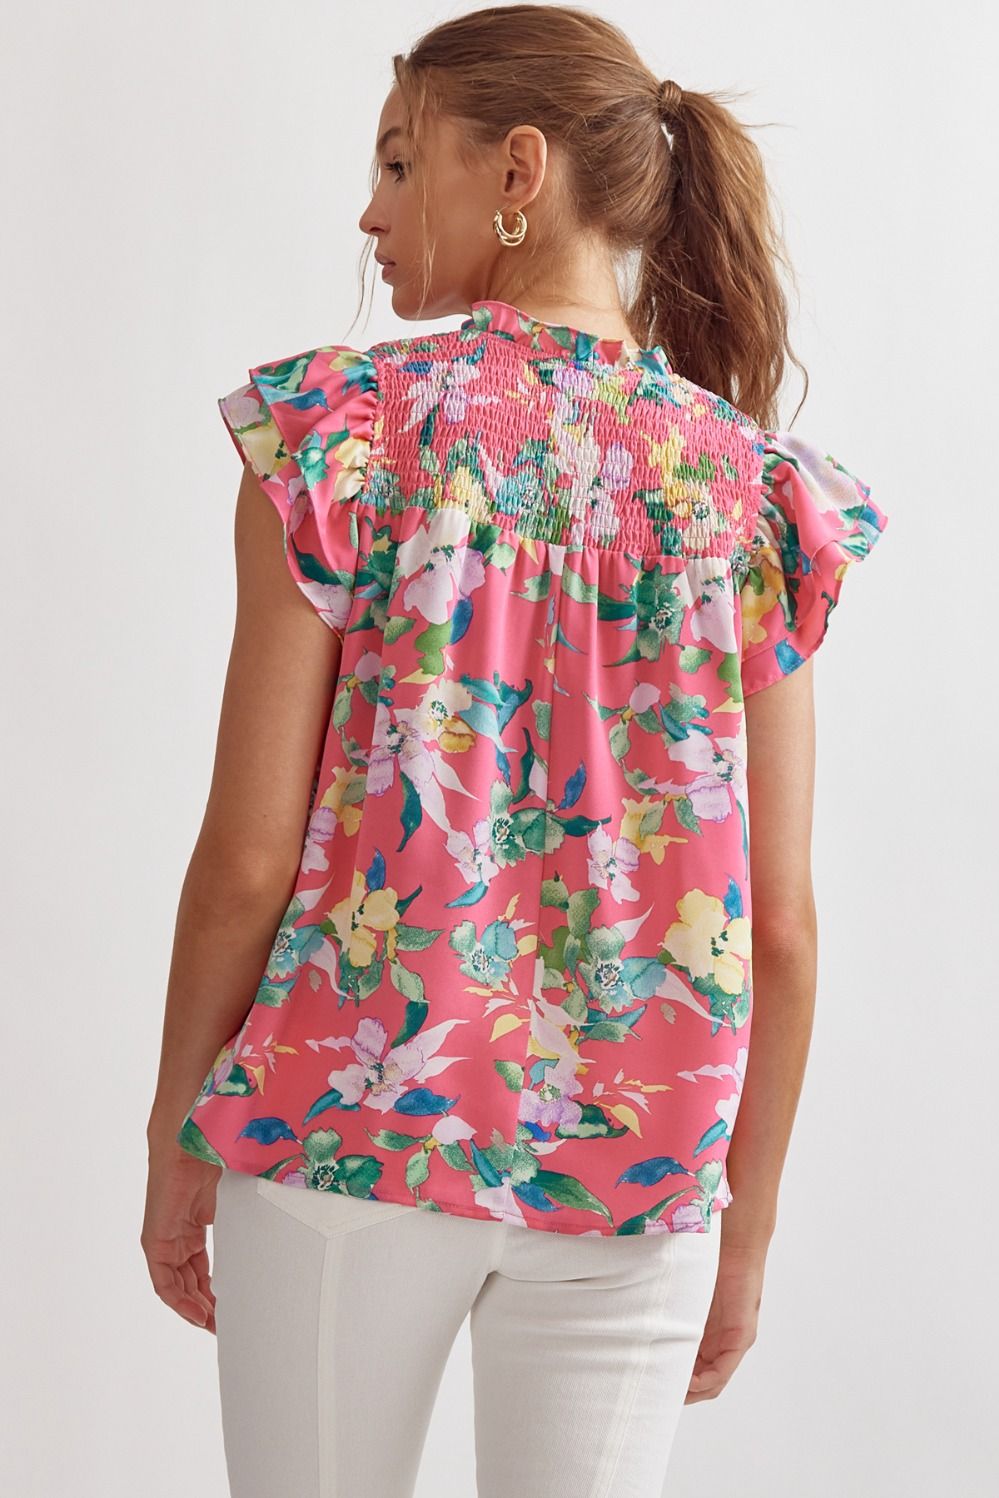 Whimsy Floral Print Top in Pink